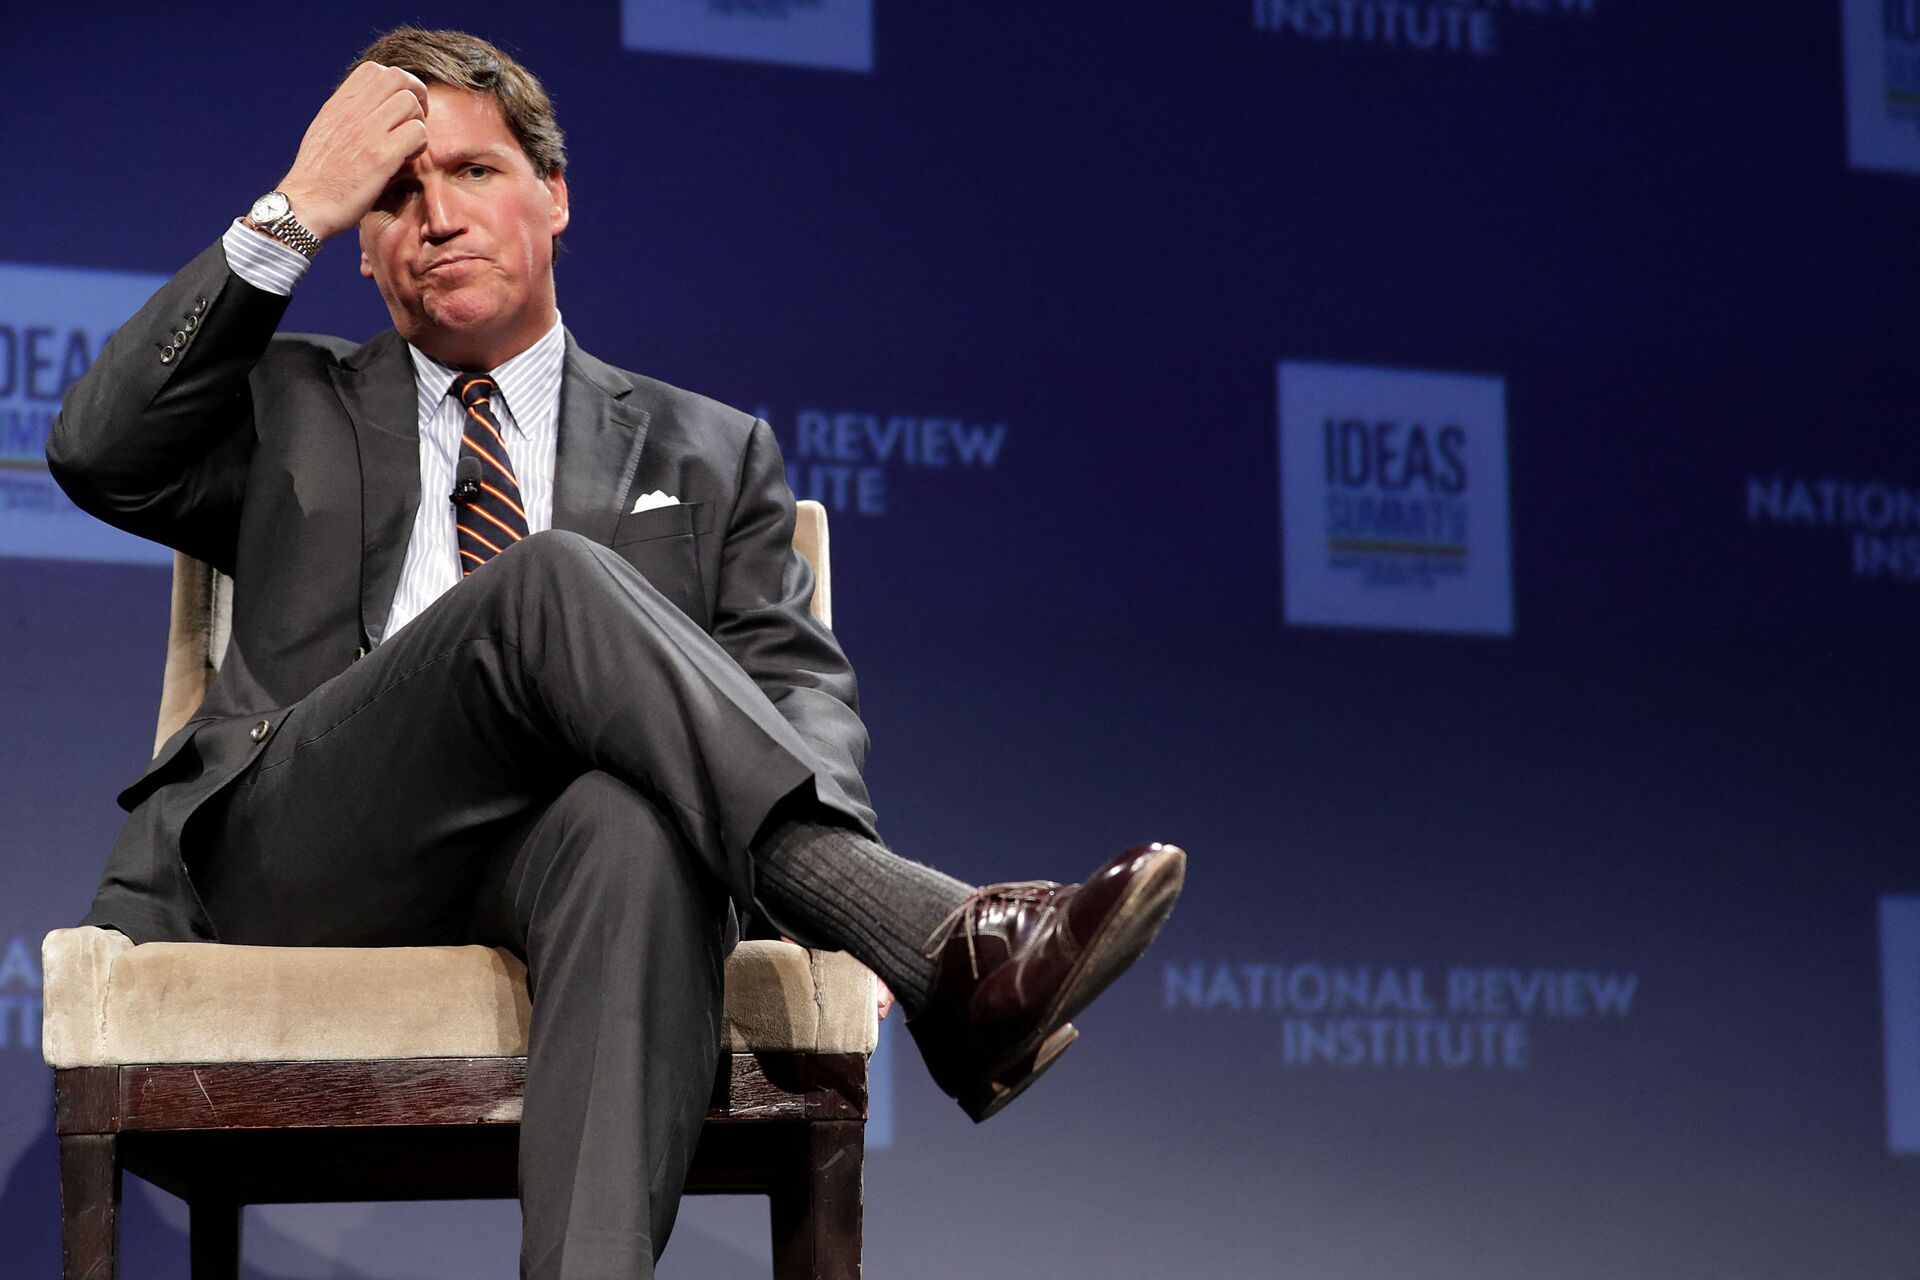 WASHINGTON, DC - MARCH 29: Fox News host Tucker Carlson discusses 'Populism and the Right' during the National Review Institute's Ideas Summit at the Mandarin Oriental Hotel March 29, 2019 in Washington, DC. - Sputnik International, 1920, 07.09.2021